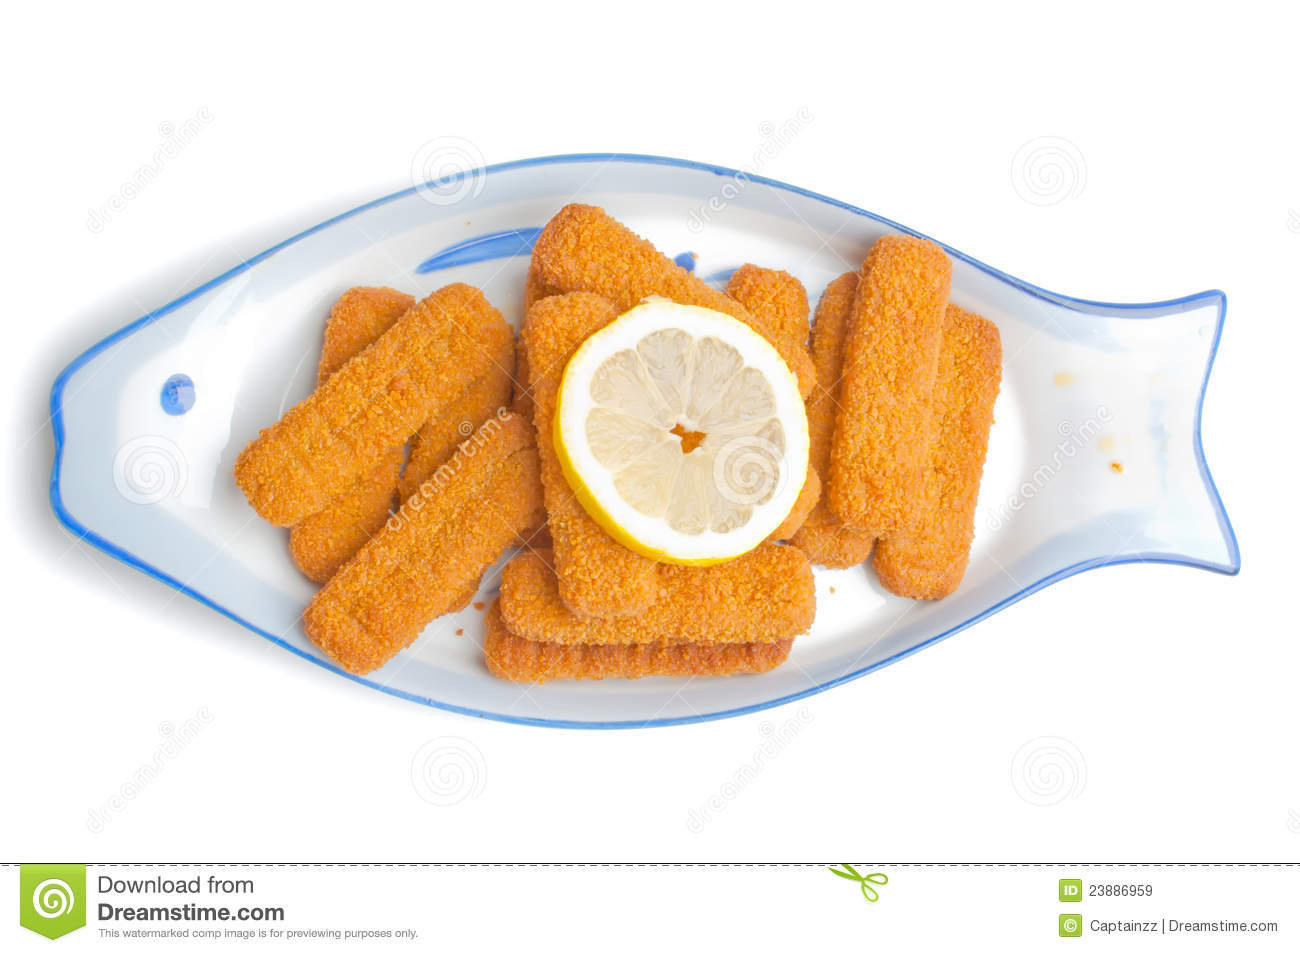 Fried Fish Sticks On The Fish Shape Plate Isolated On White 